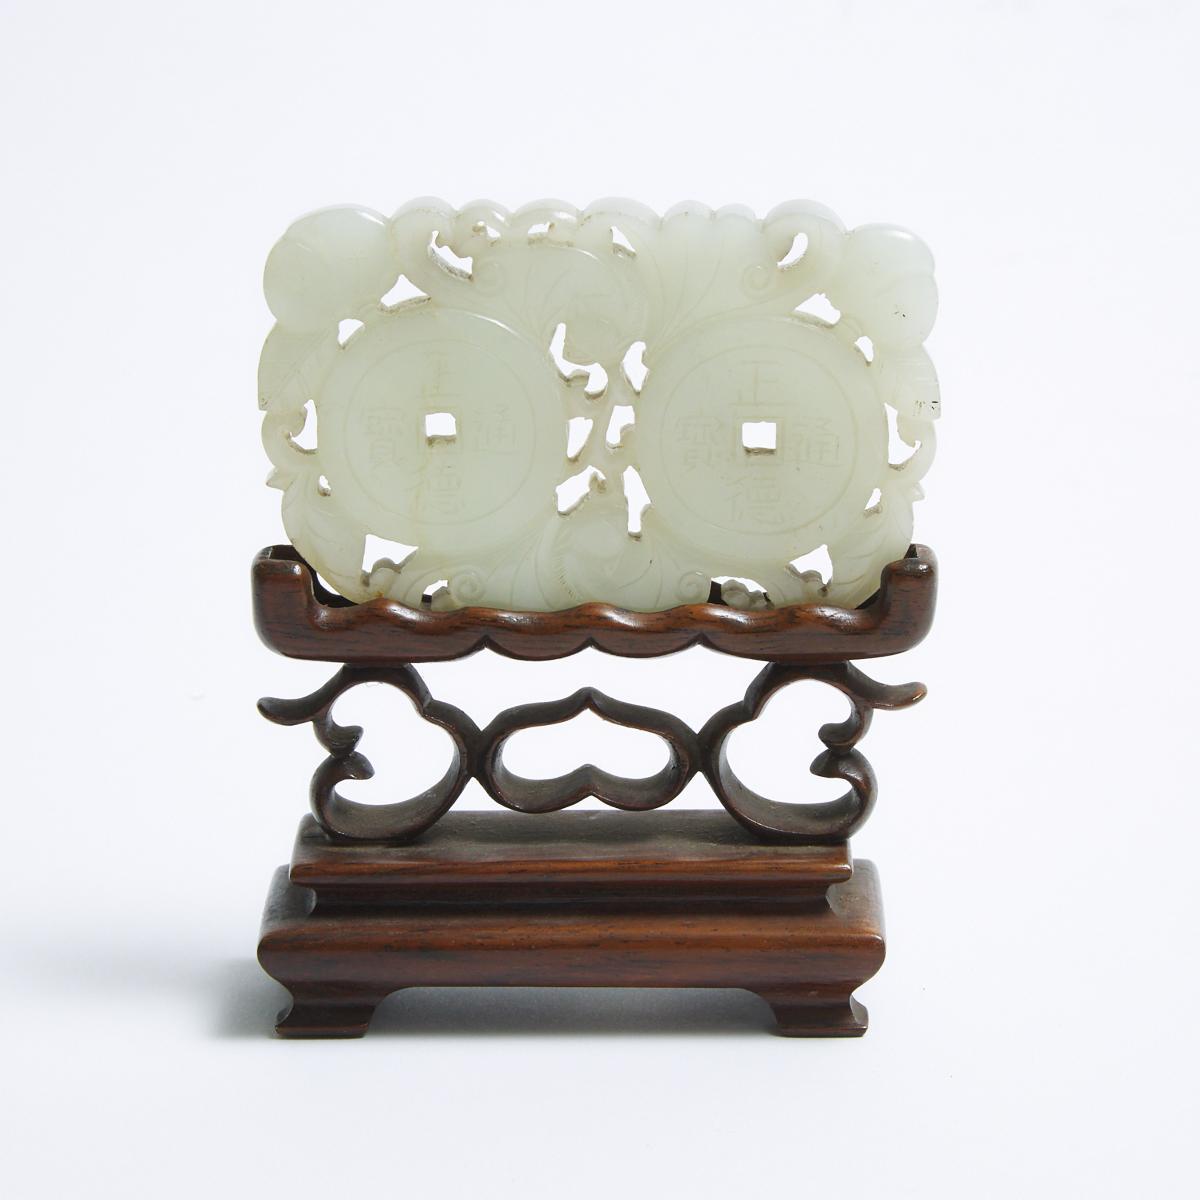 A Group of Three Pale Celadon Jade Carvings, Qing Dynasty, 清 青白玉雕一组三件, largest length 3.3 in — 8.3 c - Image 5 of 5